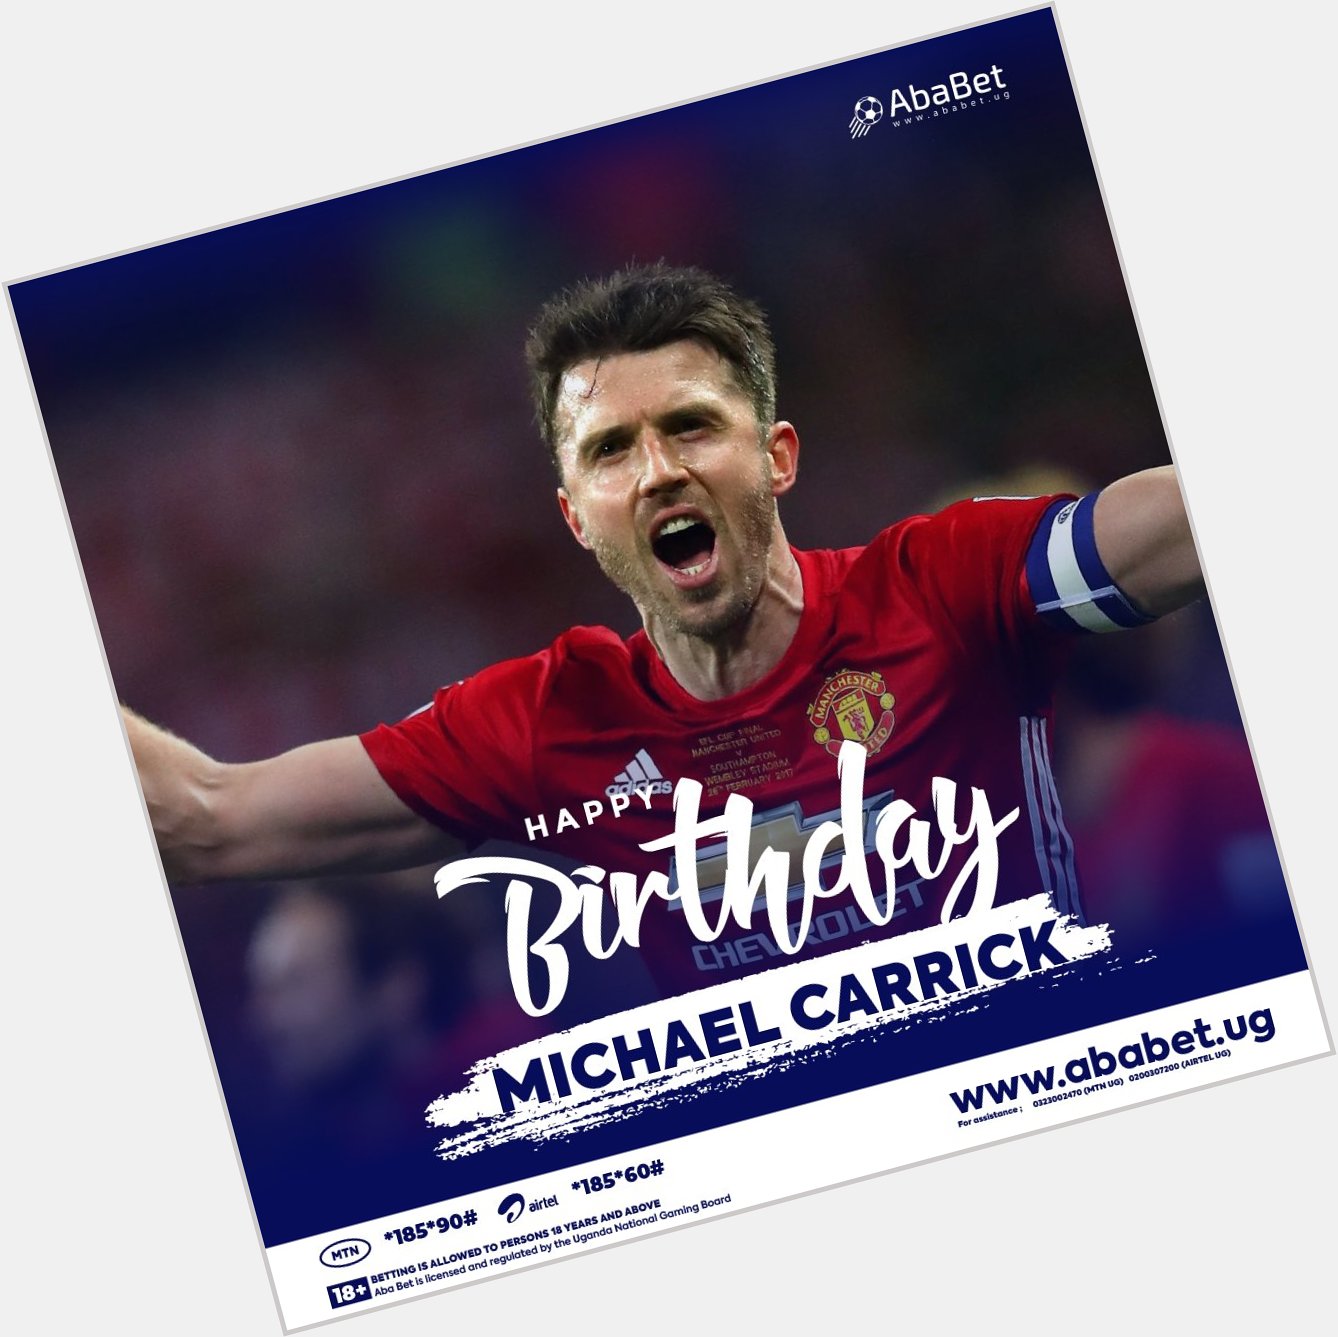 Happy 41st birthday, Michael Carrick.
One of the best midfielders of his generation!  